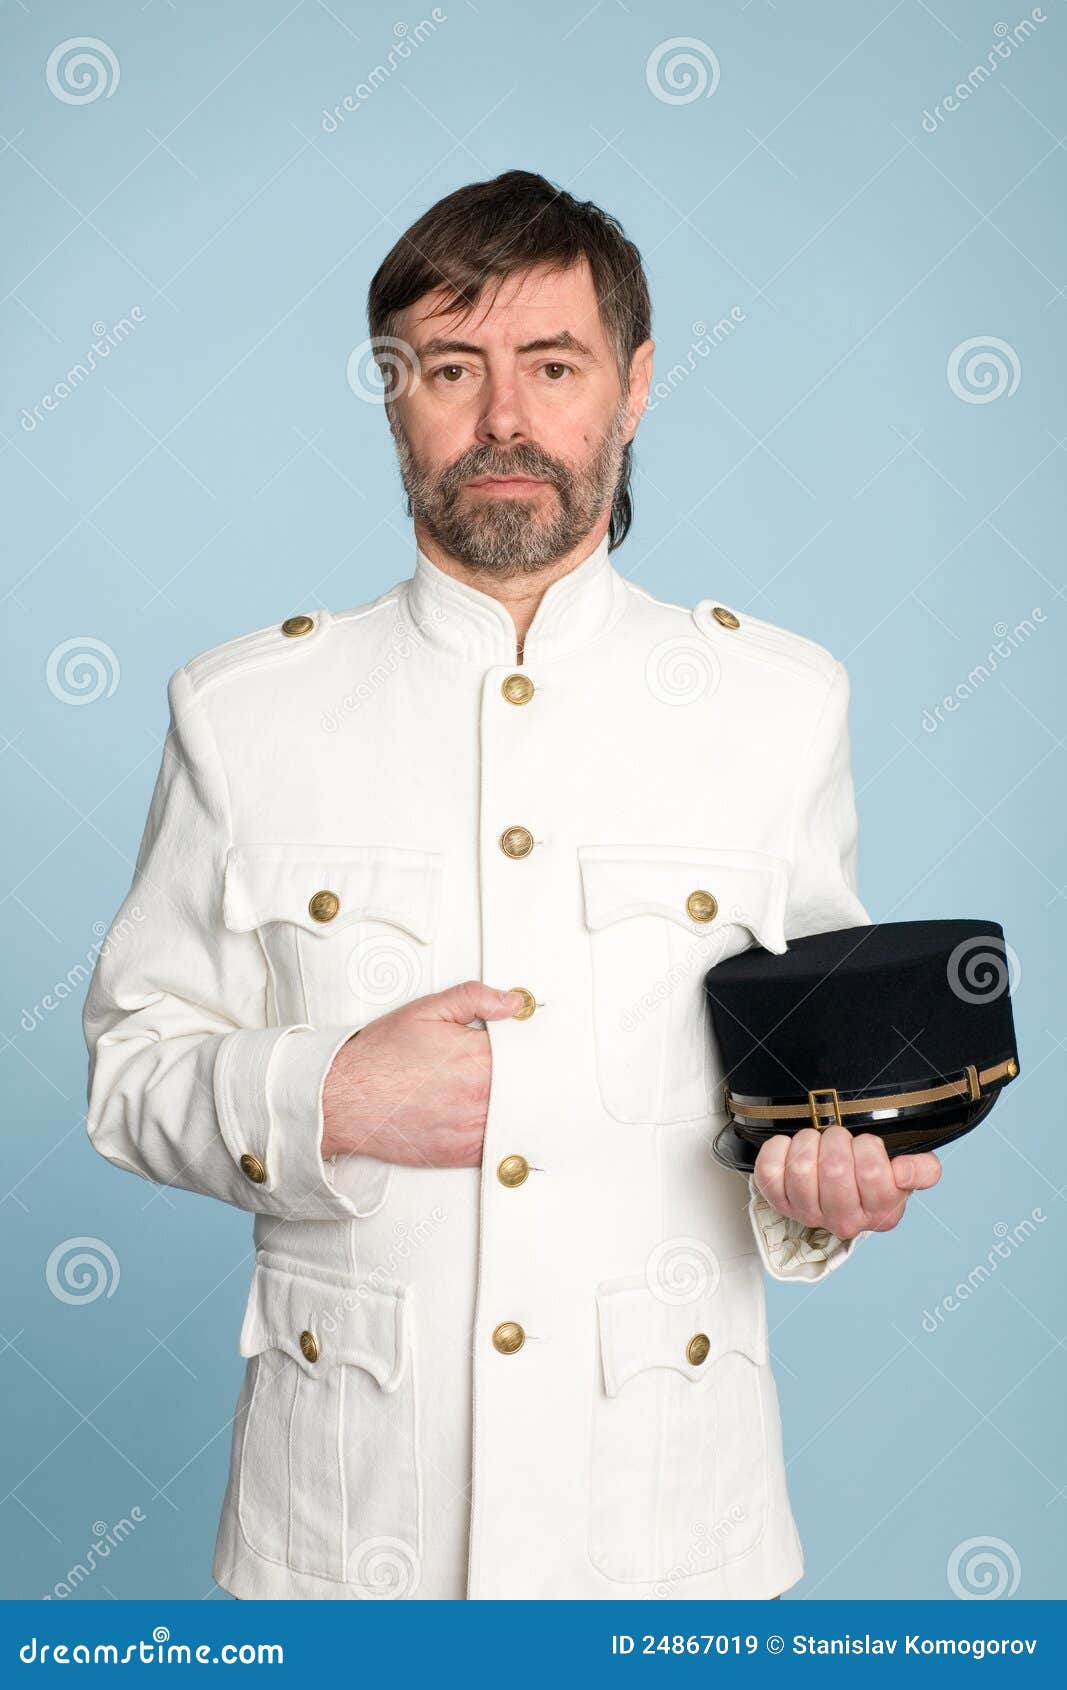 Man in Form Officer with Cap Stock Image - Image of aged, adult: 24867019